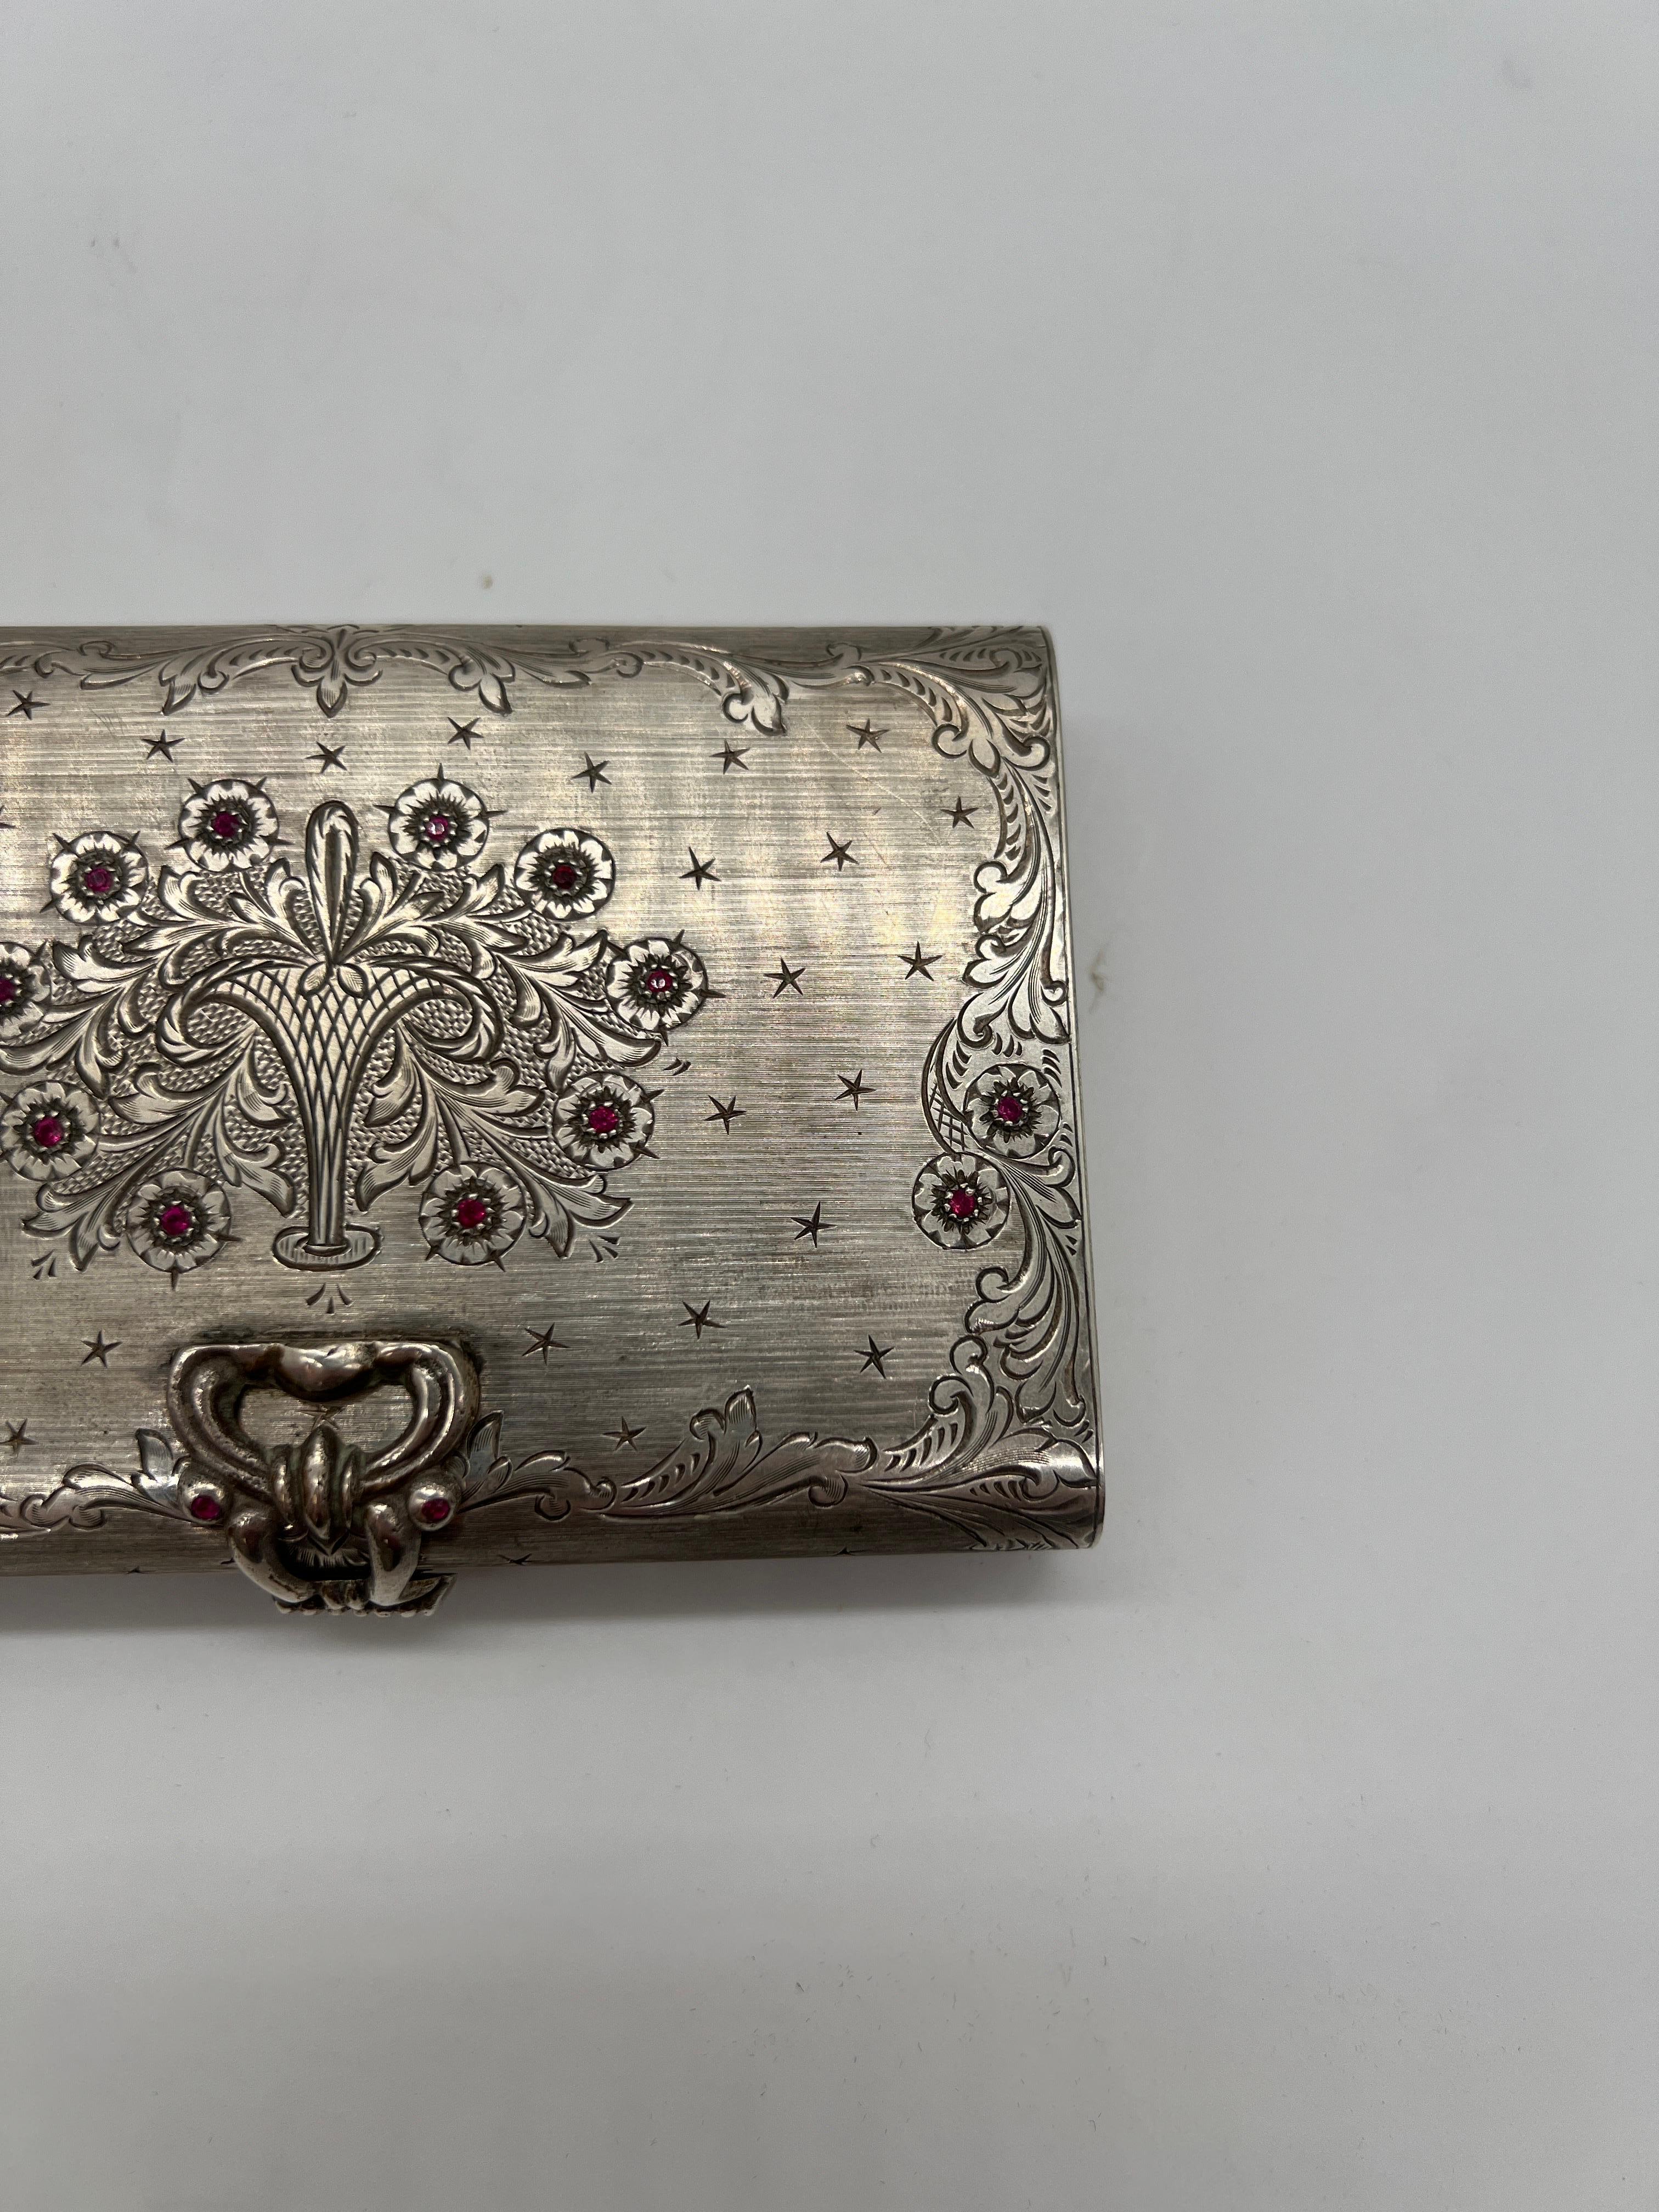 Antique Italian 800 Hand Chased Silver & Ruby Inset Minaudière Vanity Case In Good Condition For Sale In Atlanta, GA